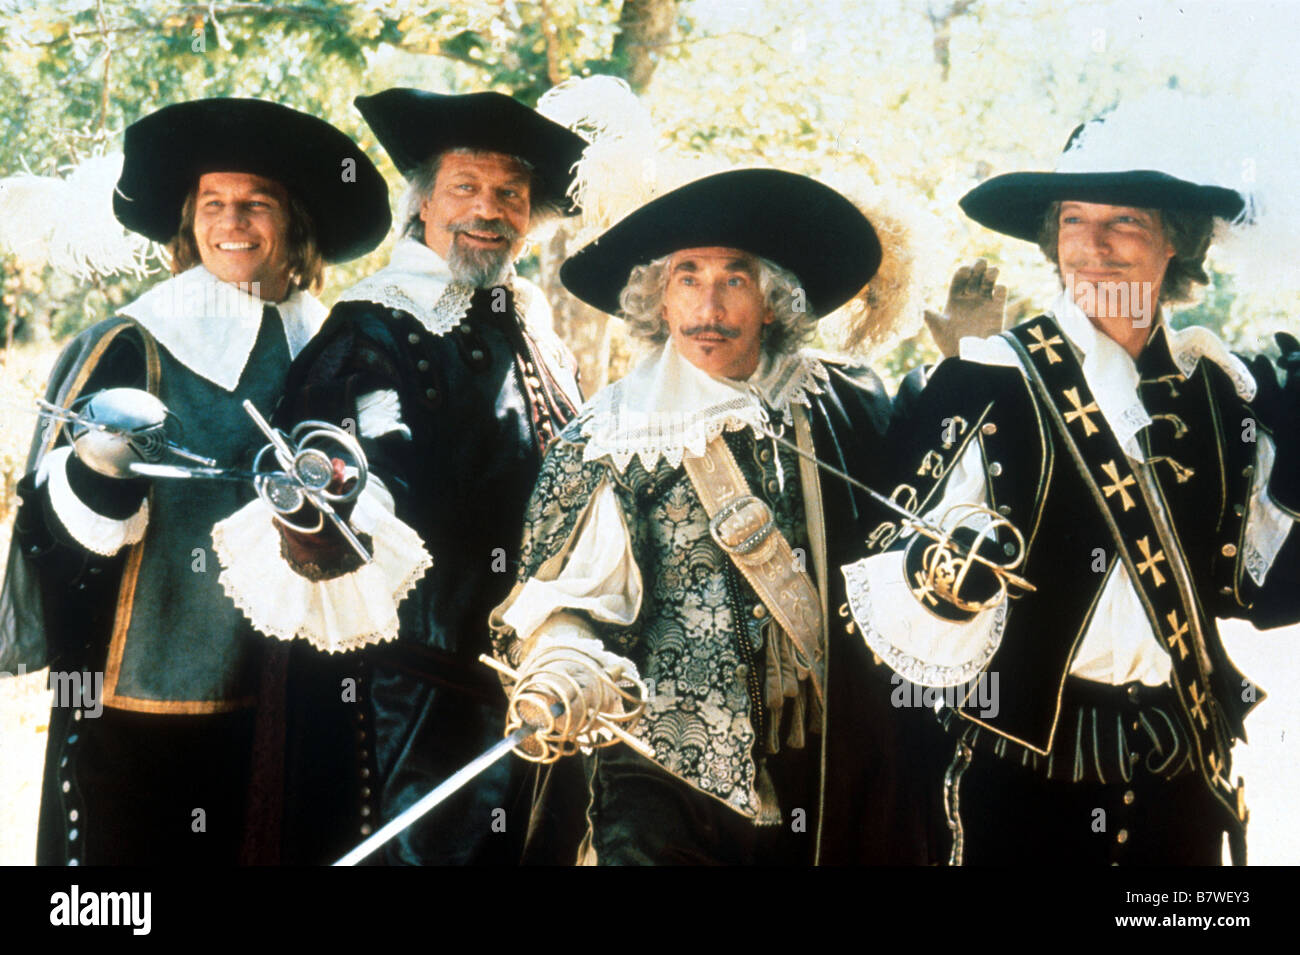 Oliver Reed in The Three Musketeers Photo Print (24 x 30)